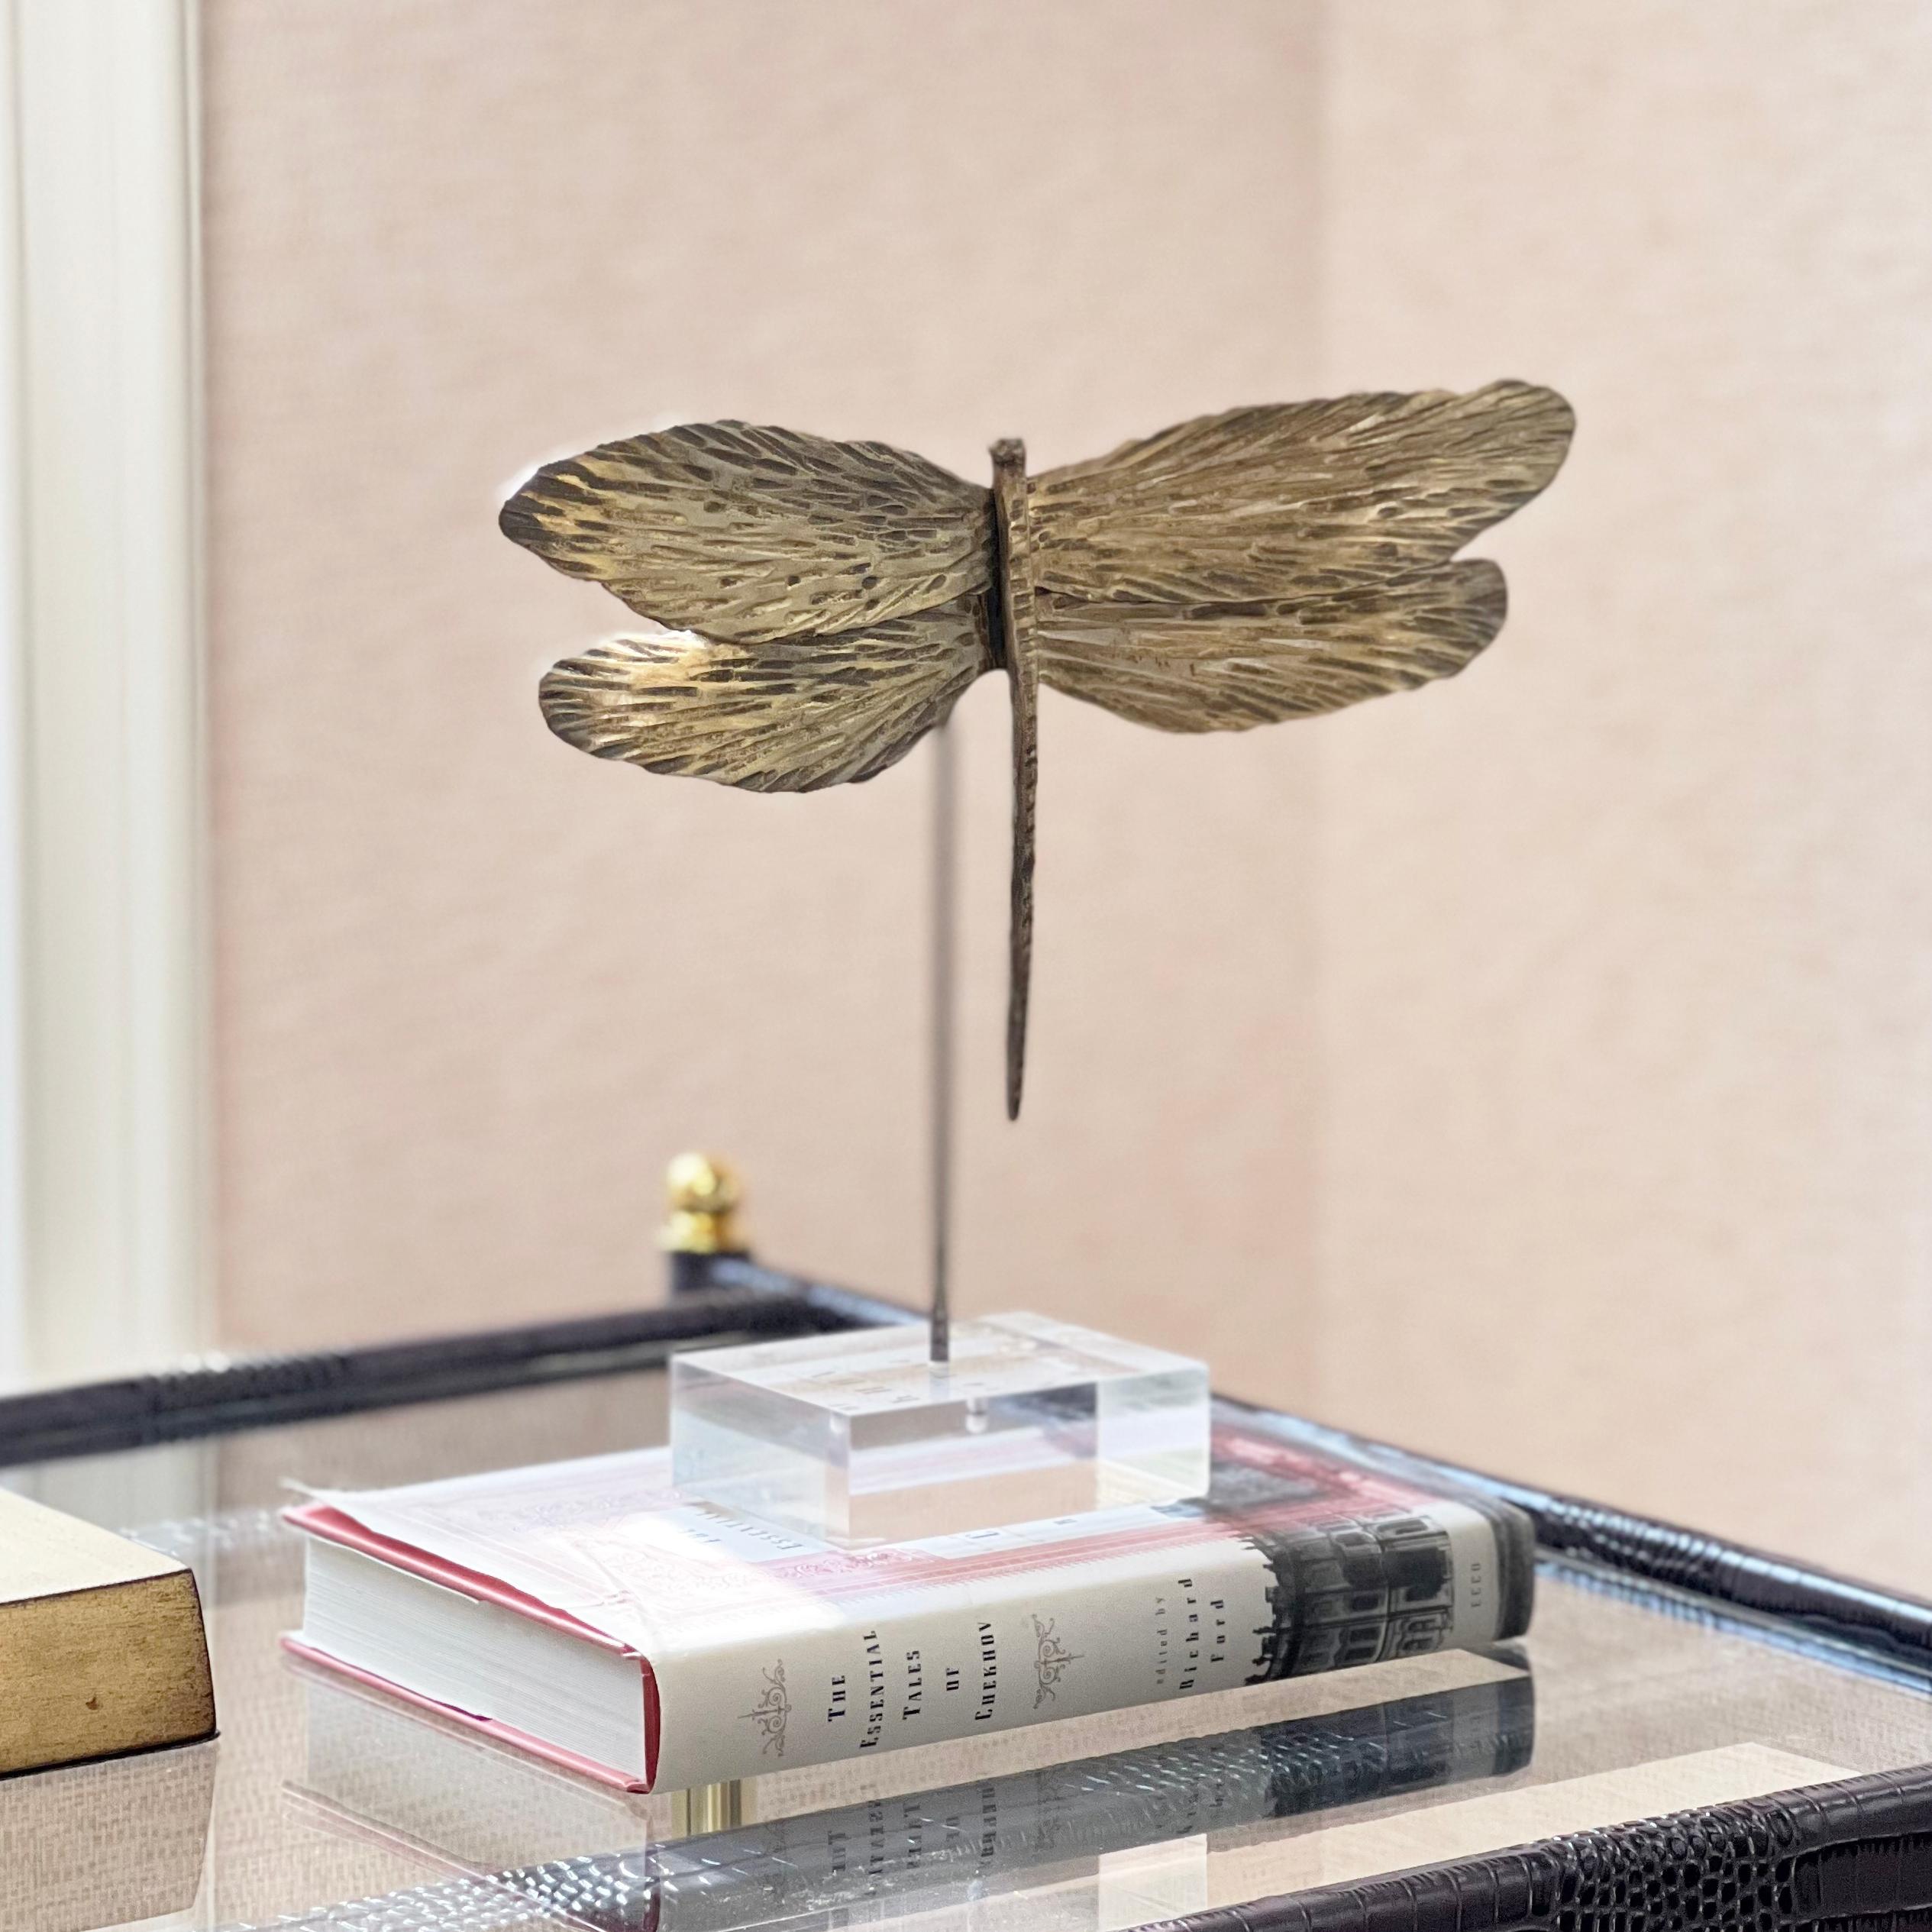 Mix it up. With gilded wings textured by hand, this dragonfly accessory makes a spot more playful. Orchestrate your space with things like natural motifs that you smile.